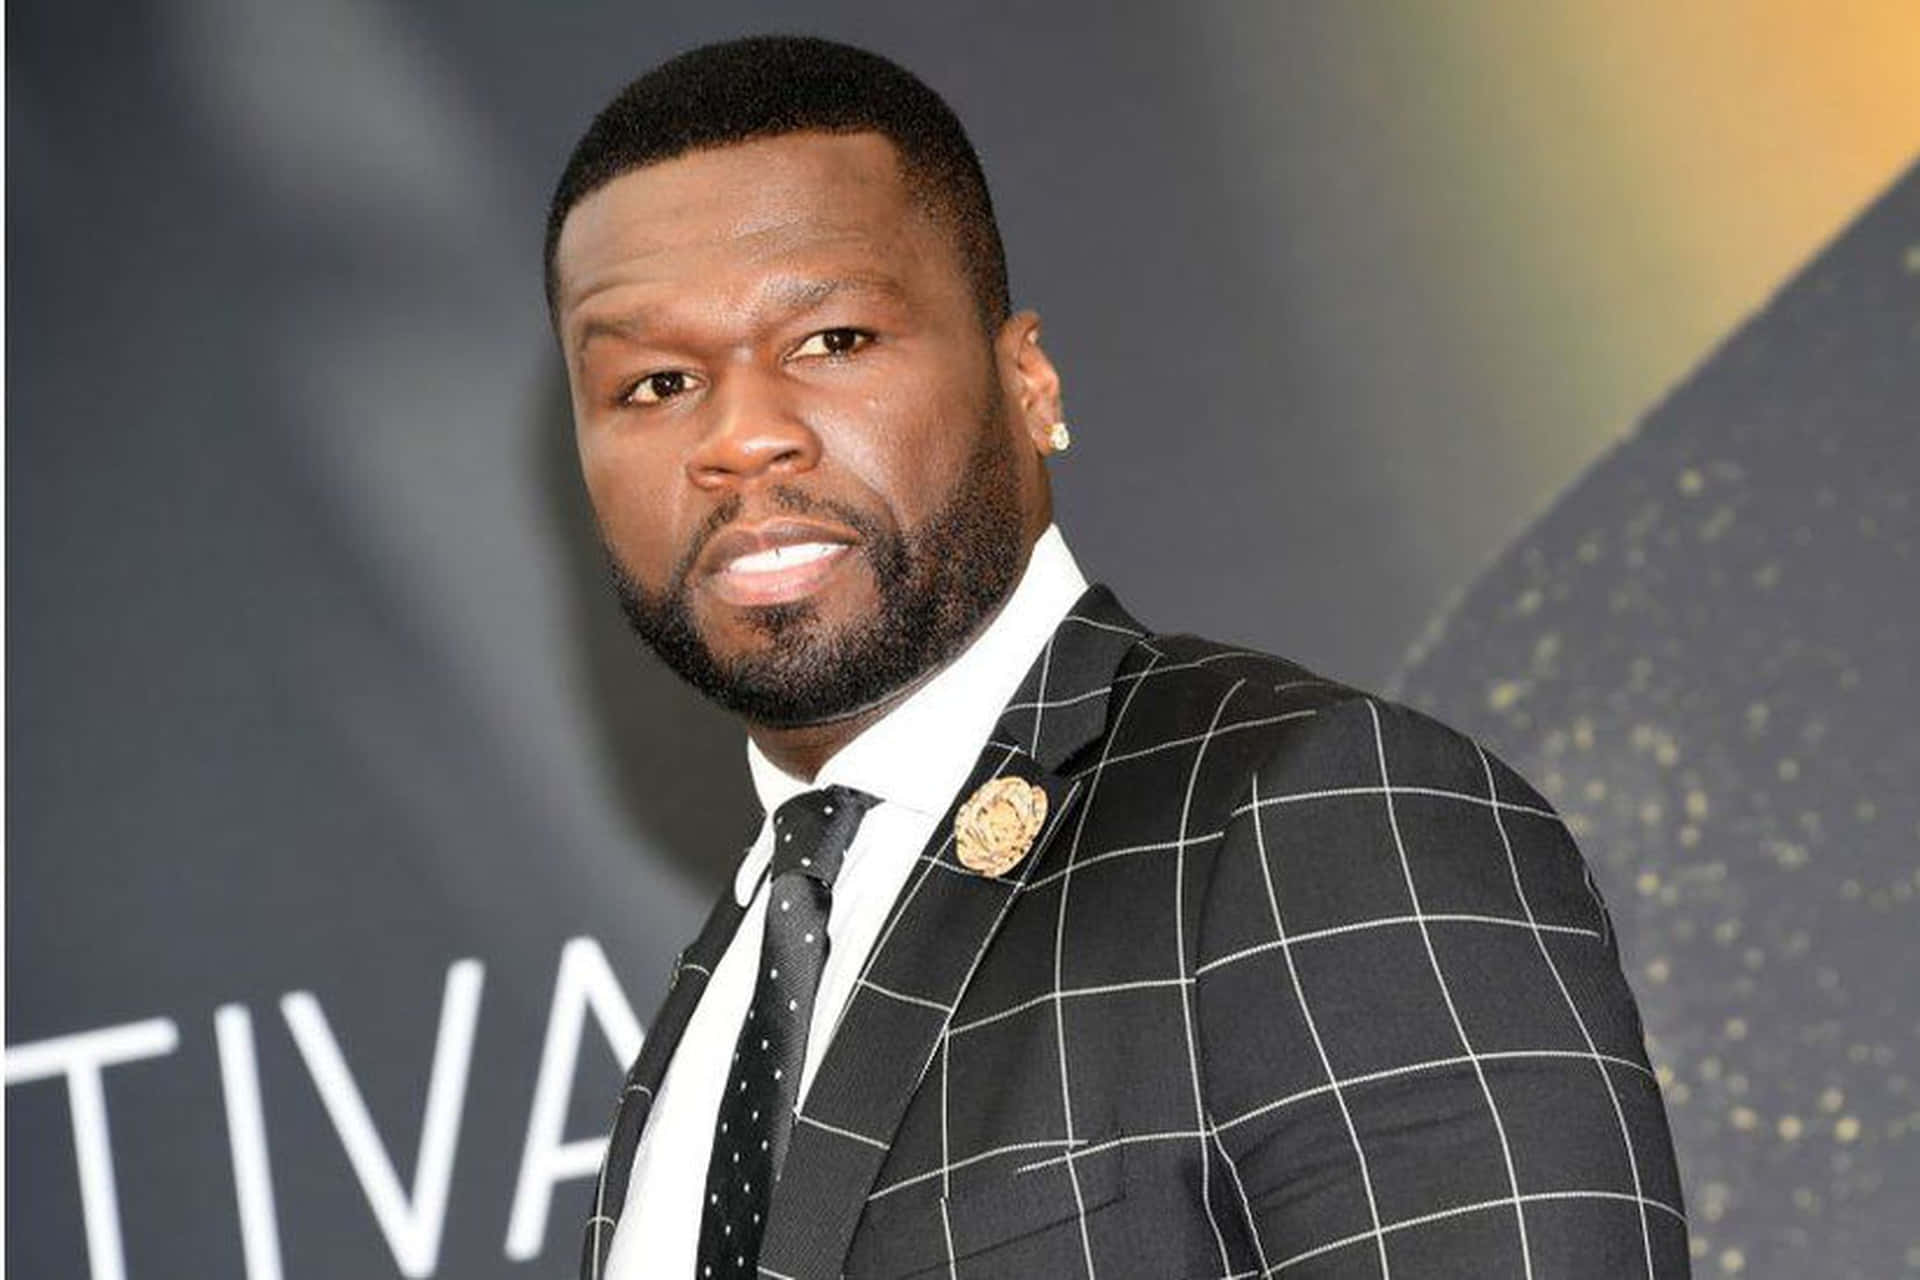 Download 50 Cent Pictures 2120 x 1413 | Wallpapers.com